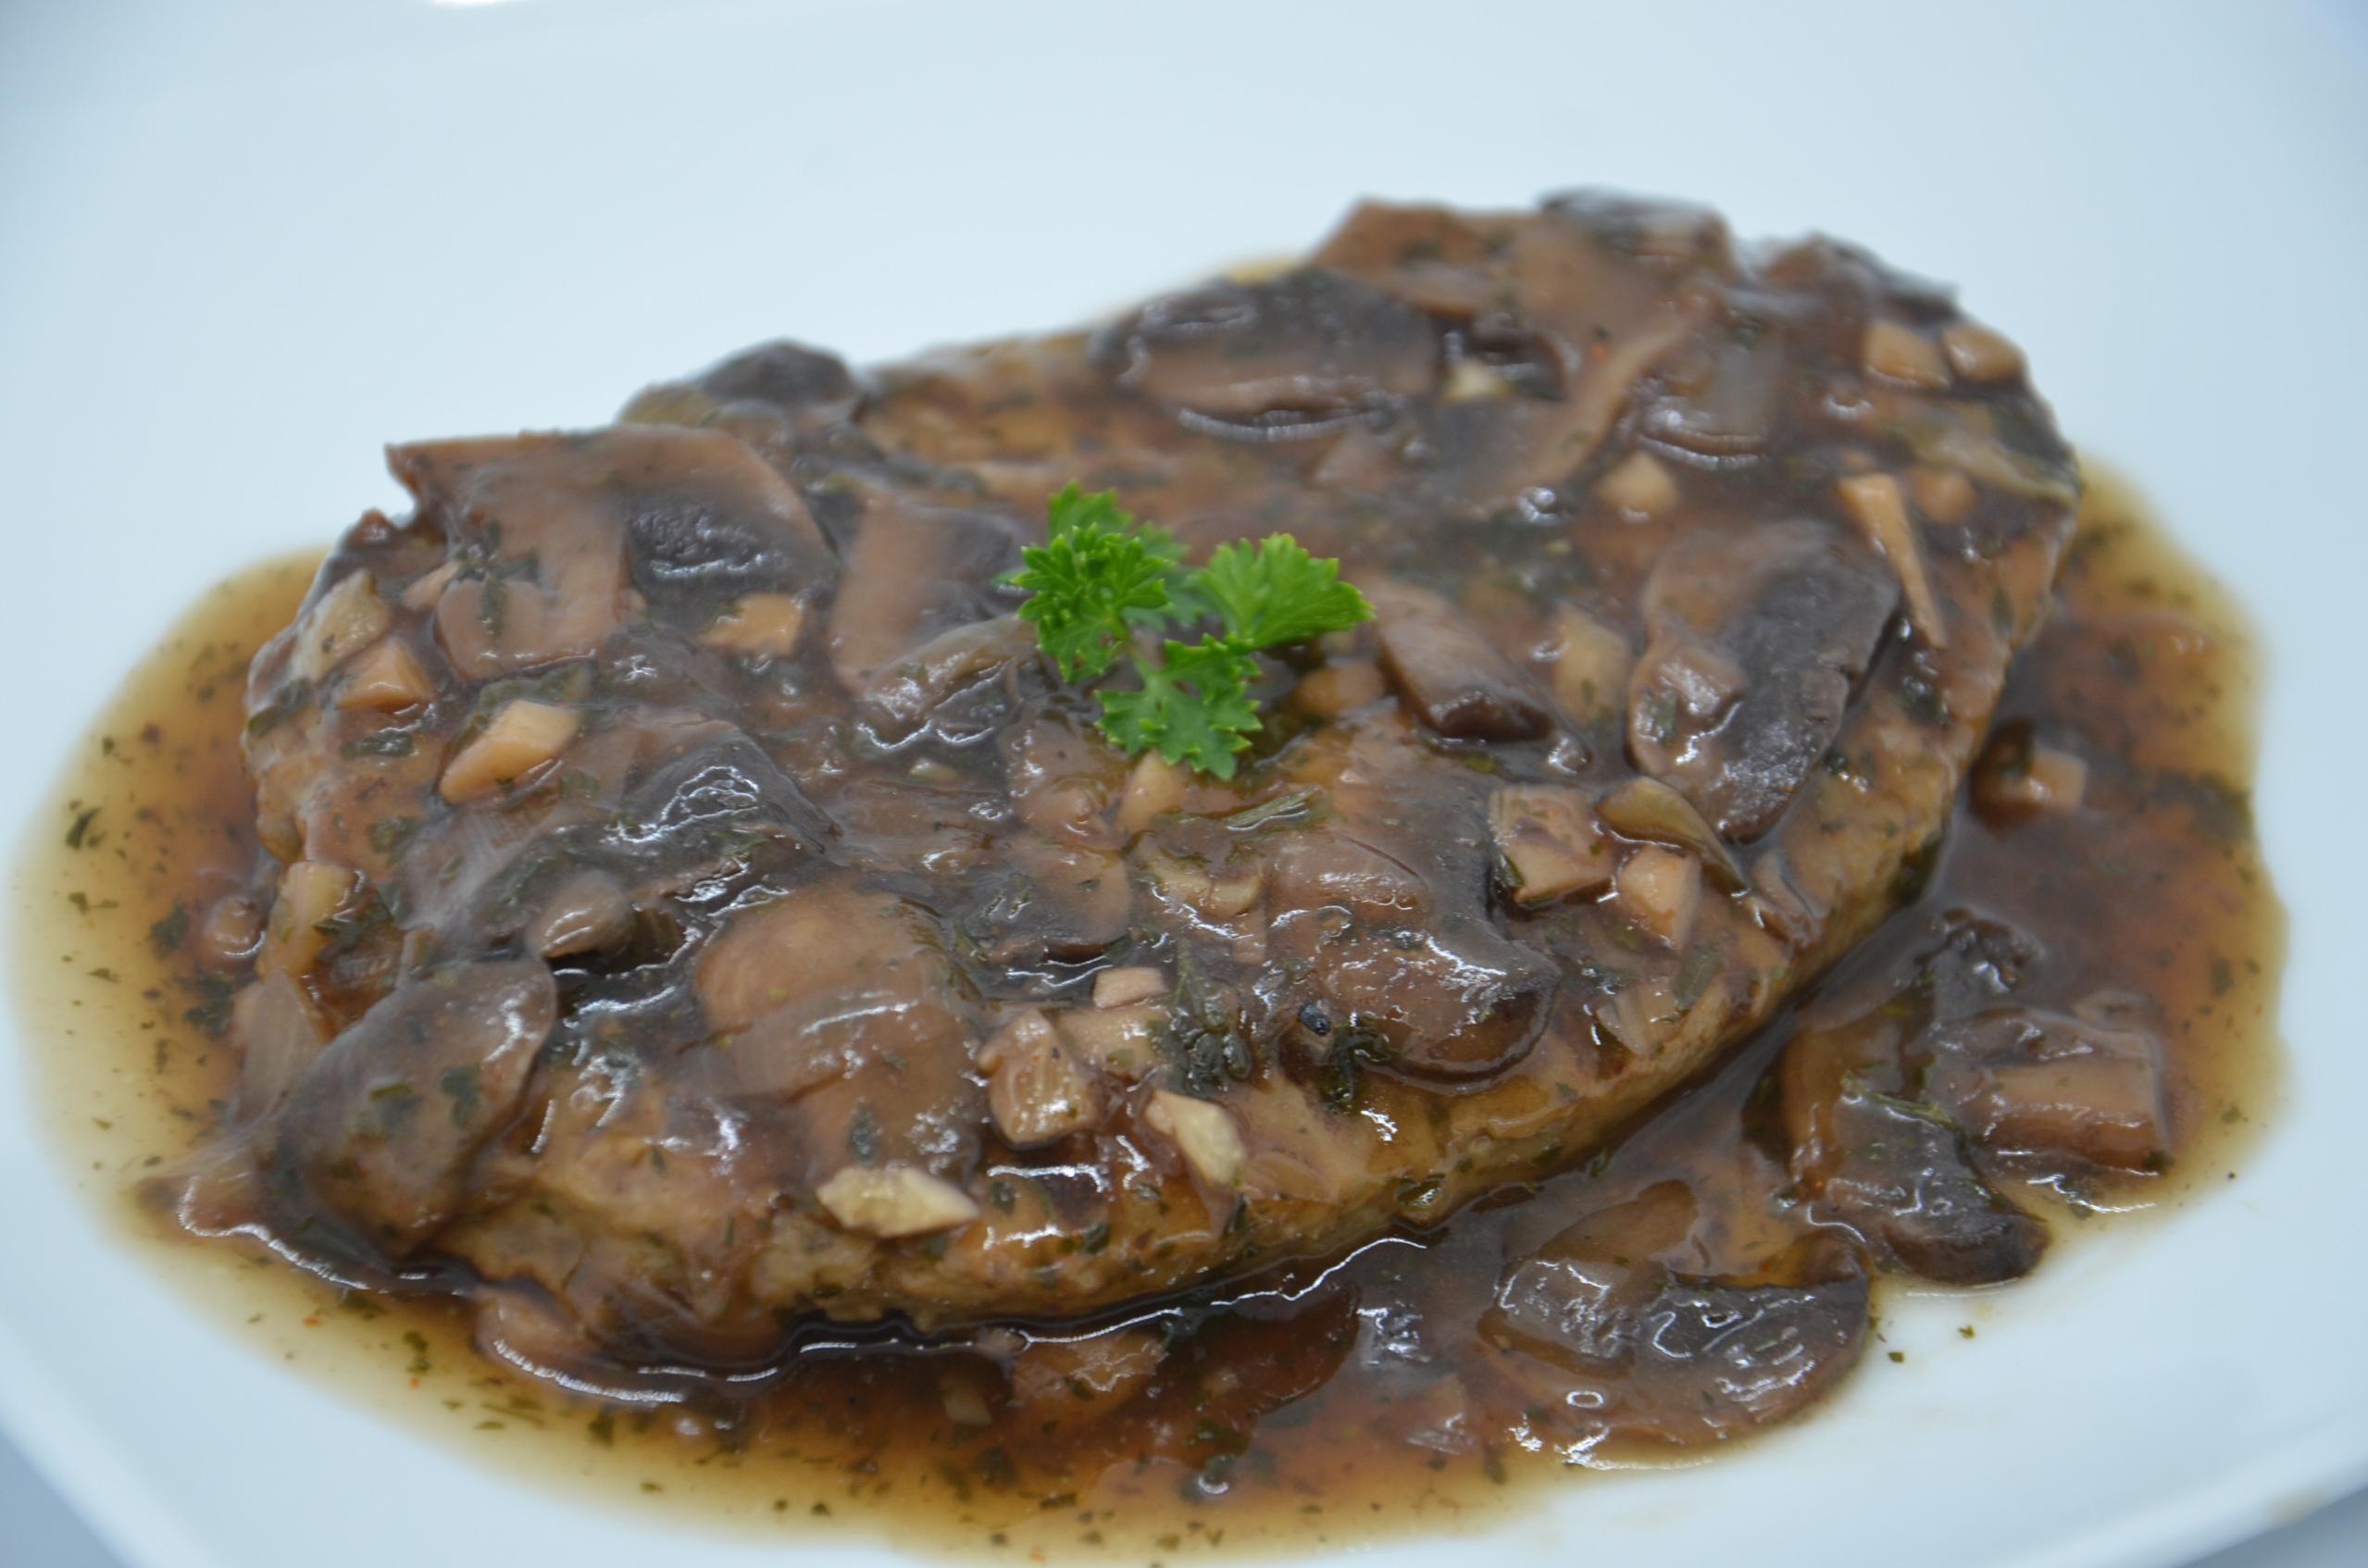  A delicious twist on classic steak and gravy